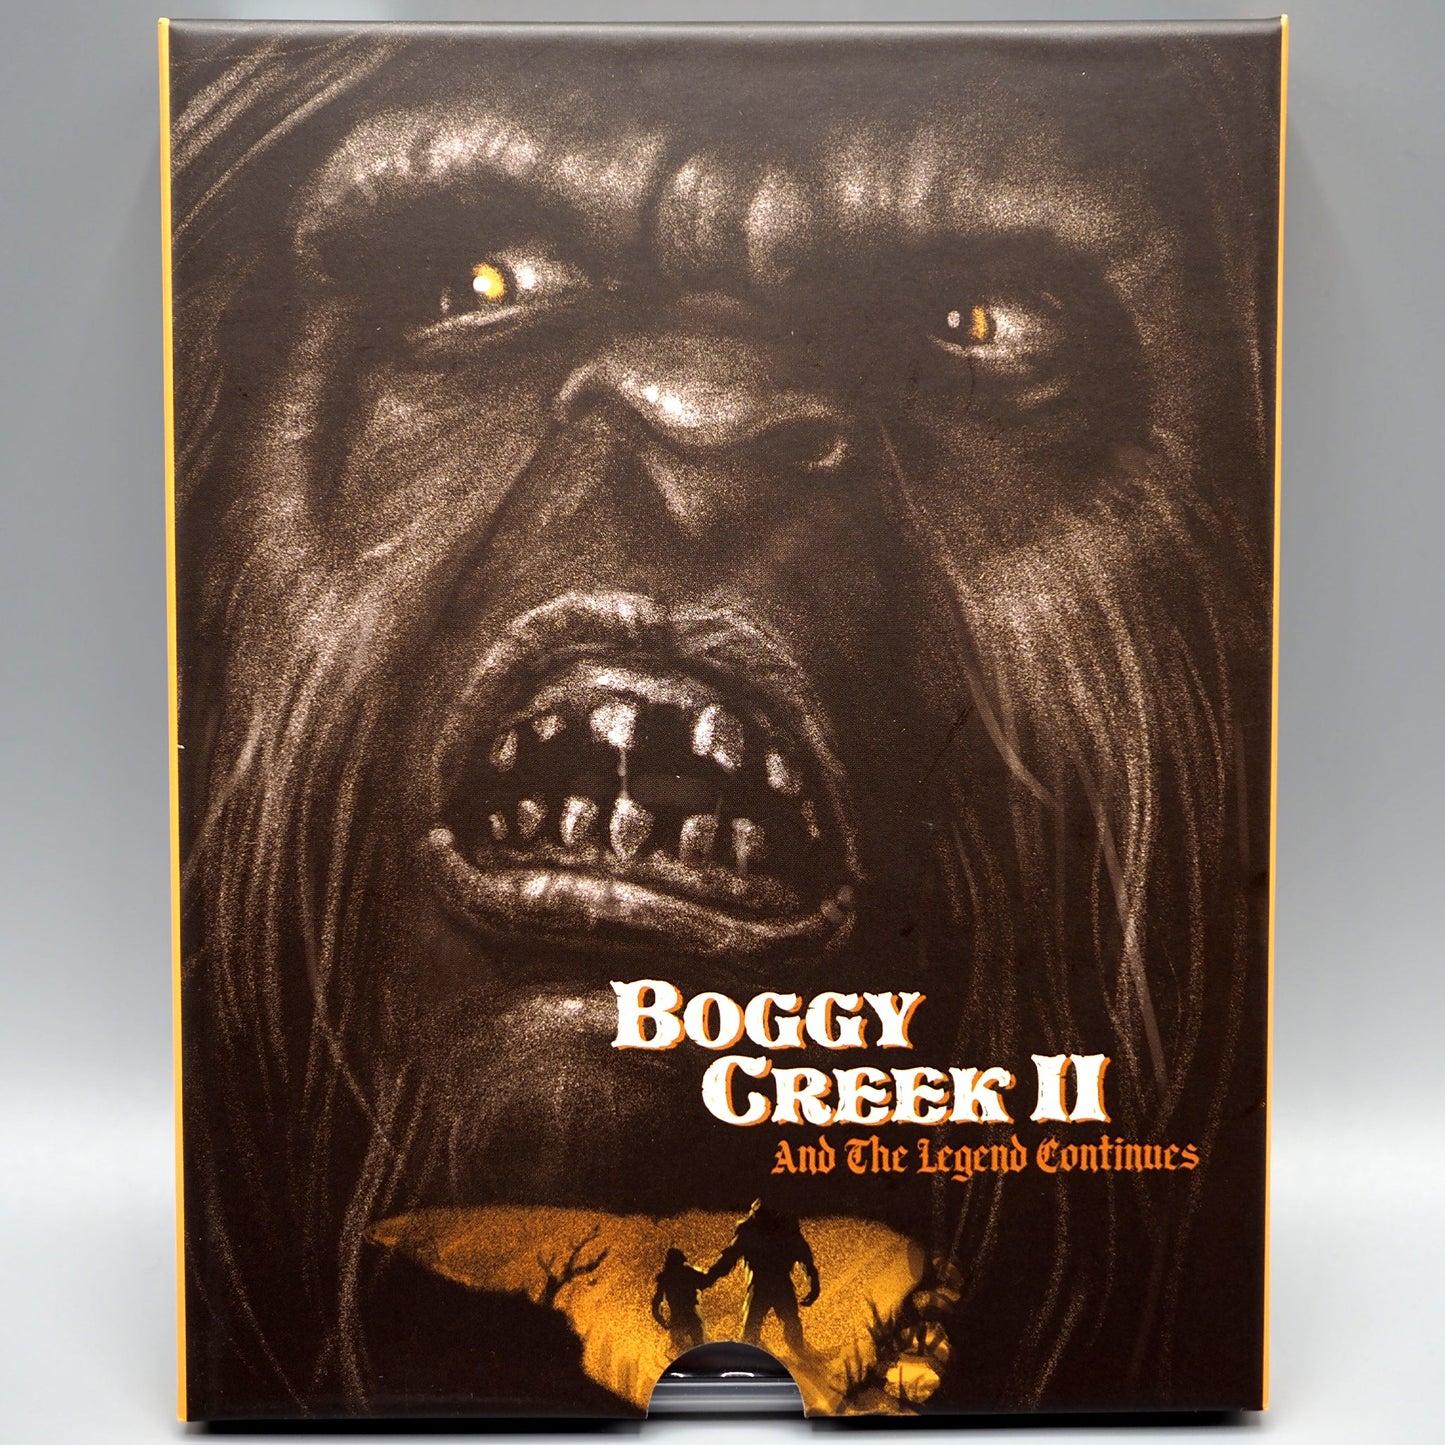 Boggy Creek II: And the Legend Continues Blu-ray with Limited Edition Slipcase